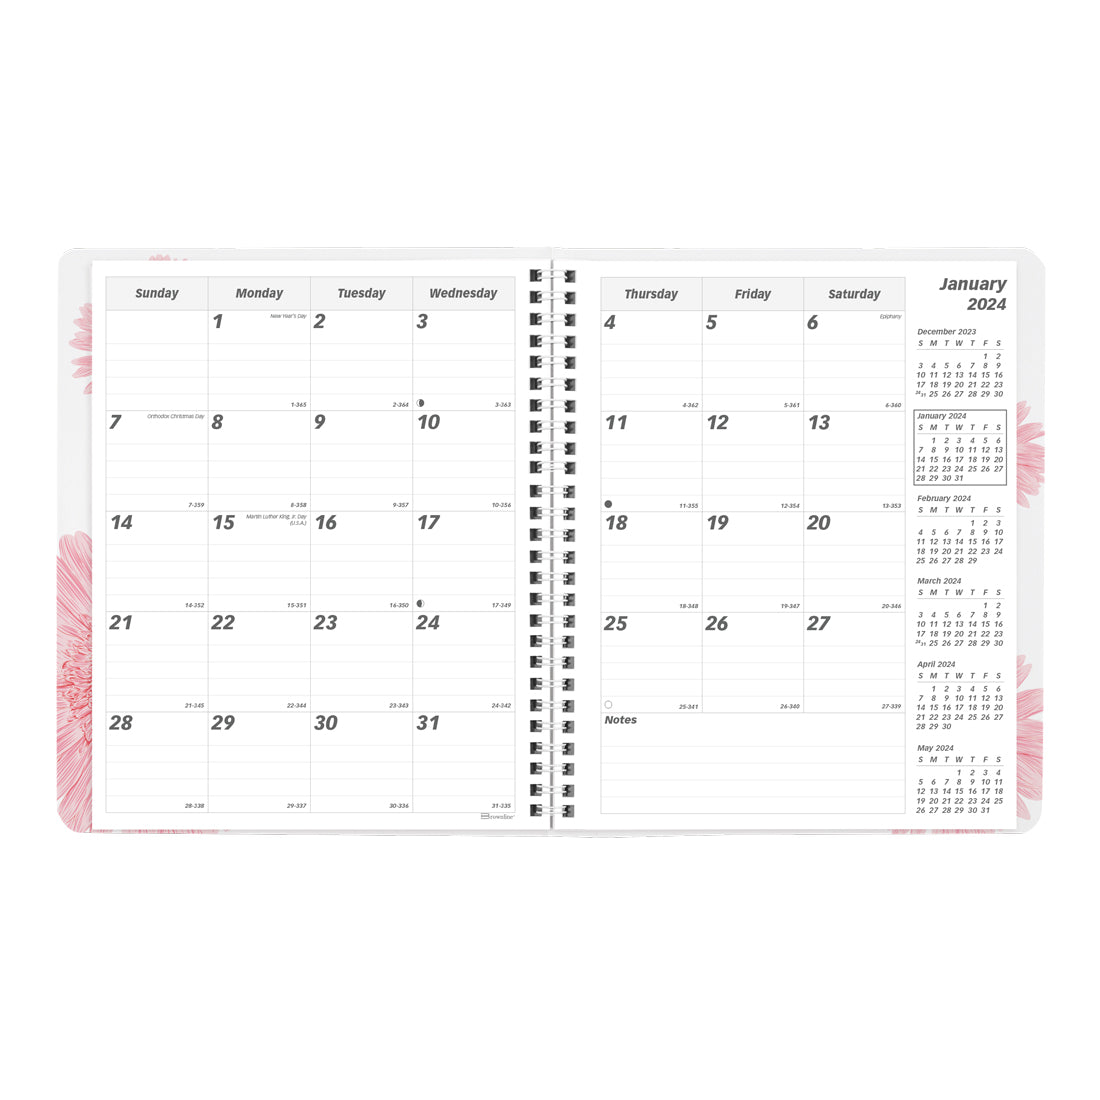 Pink Daisy Monthly Planner 2024